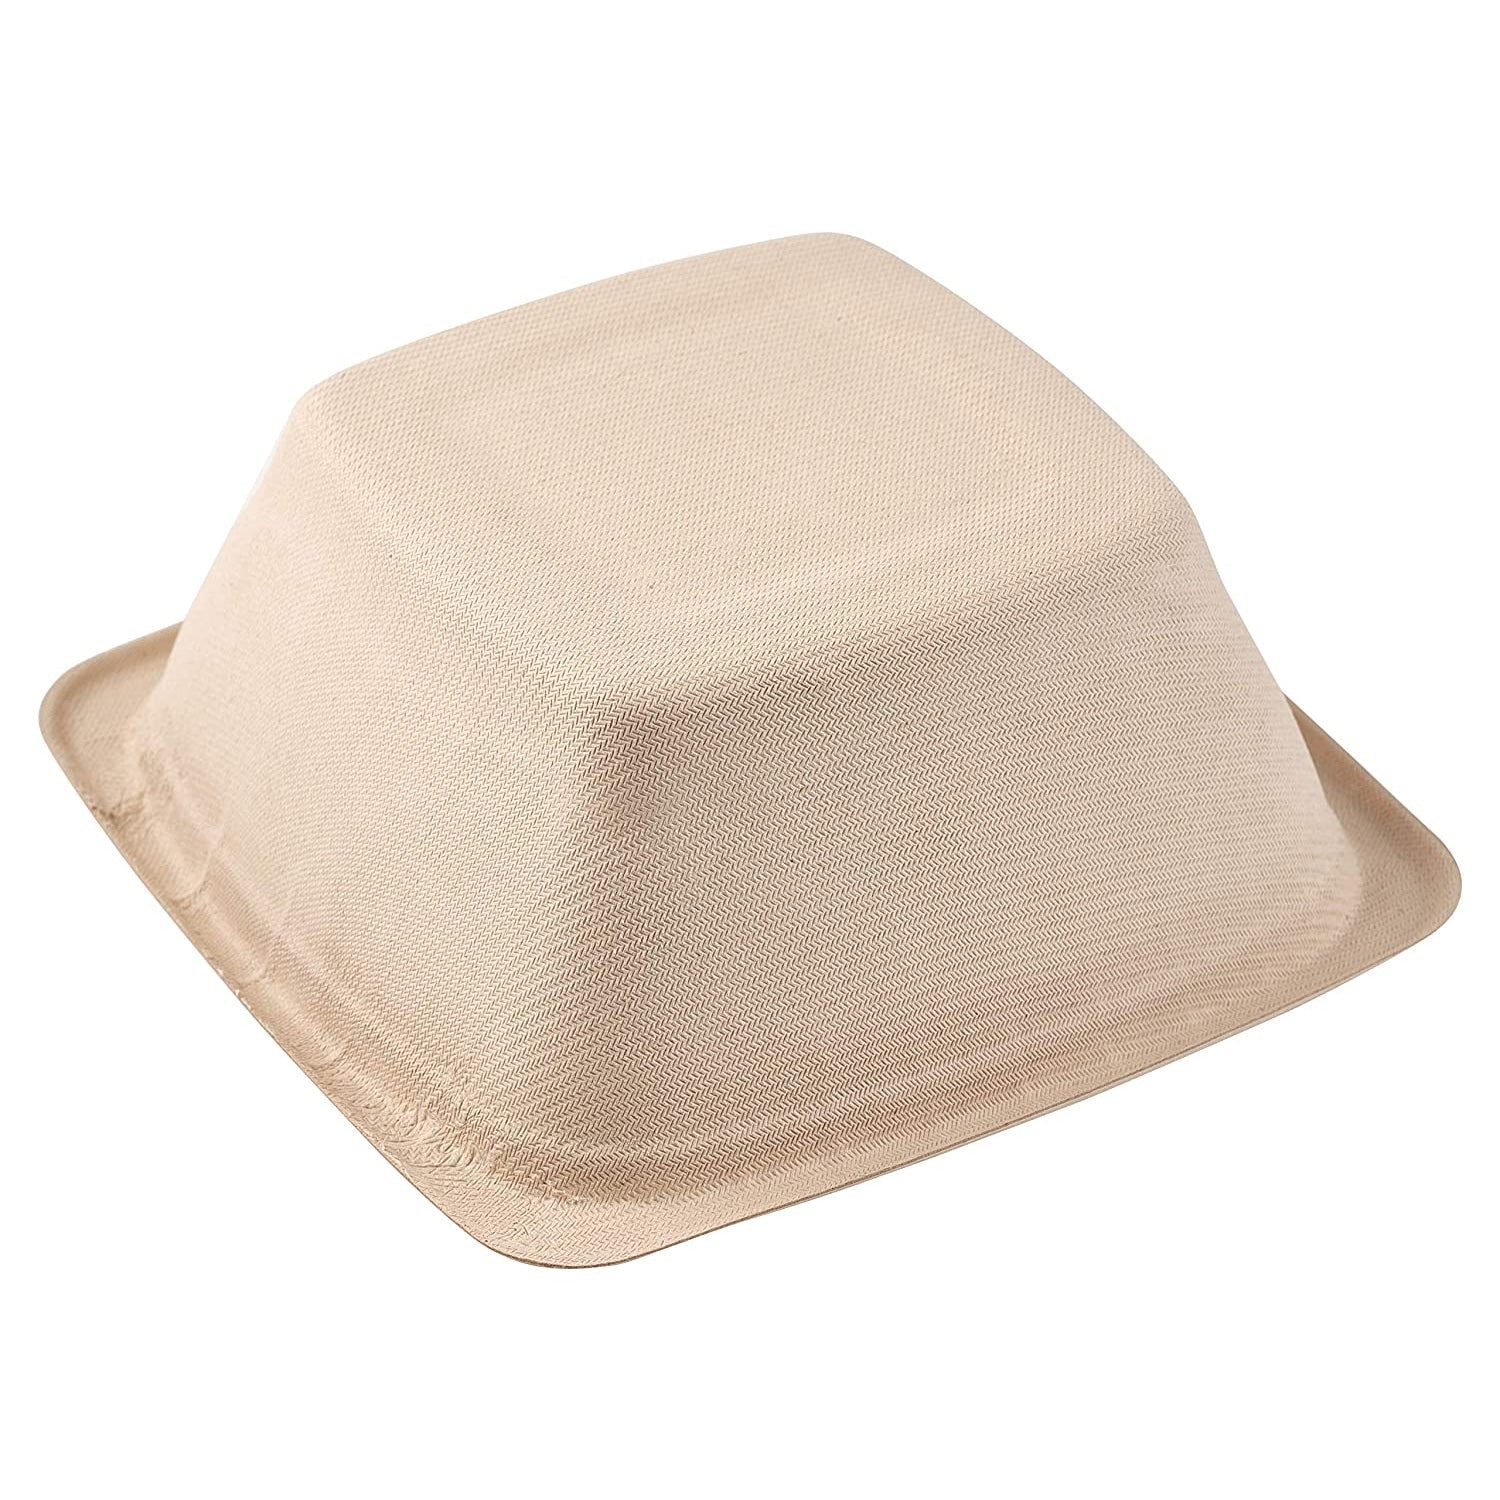 42oz Eco Friendly Disposable Square Bowls Compostable Container with Dome Lids